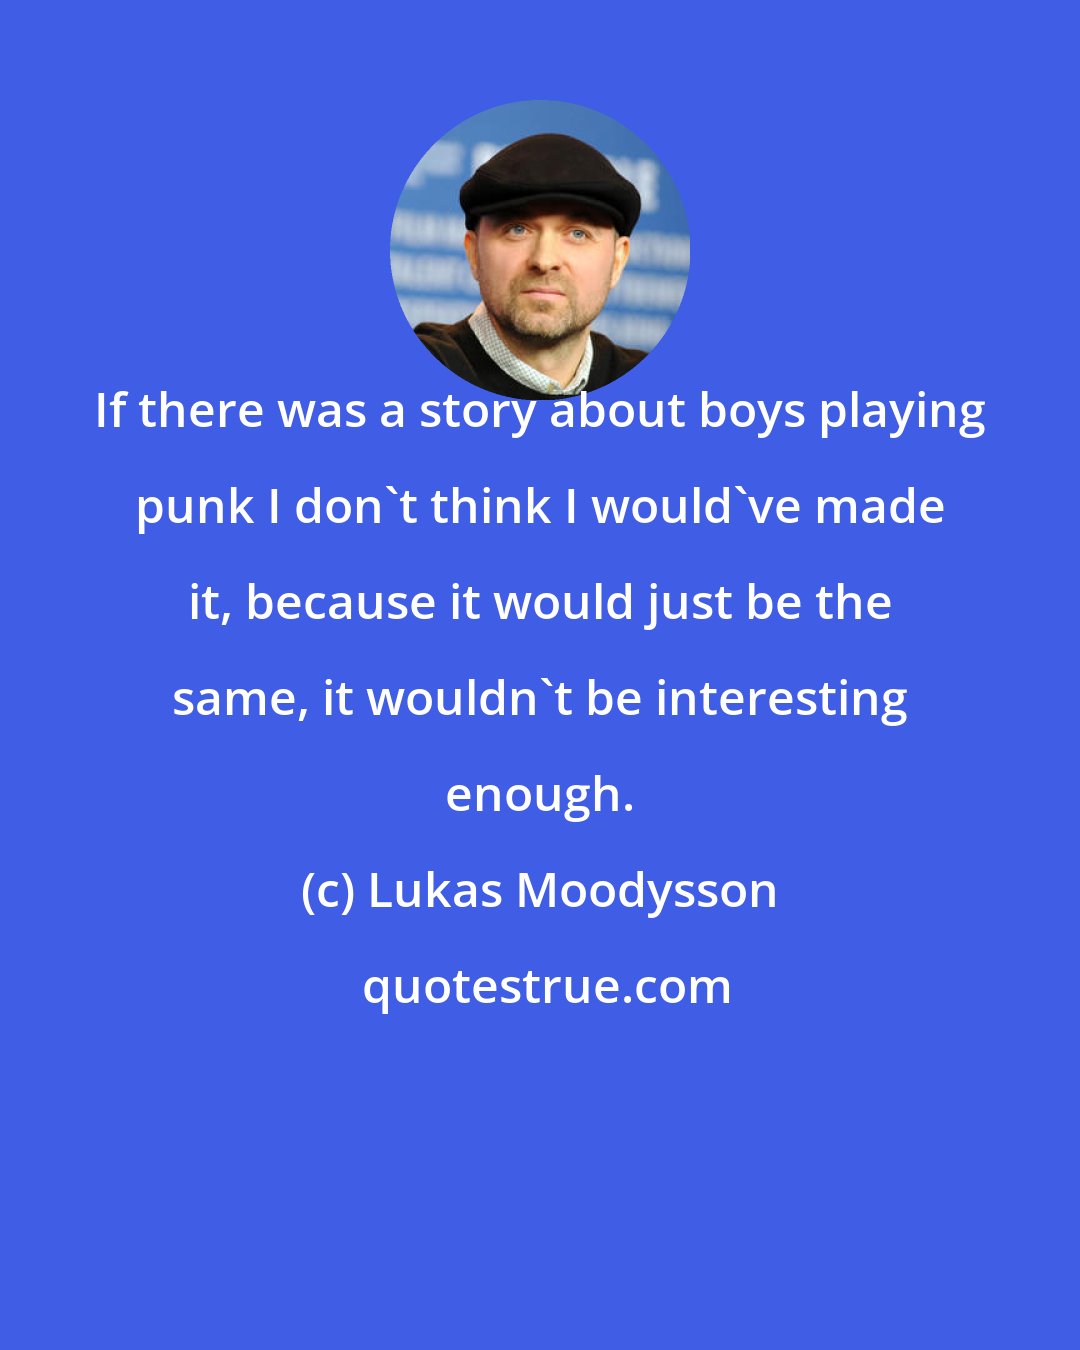 Lukas Moodysson: If there was a story about boys playing punk I don't think I would've made it, because it would just be the same, it wouldn't be interesting enough.